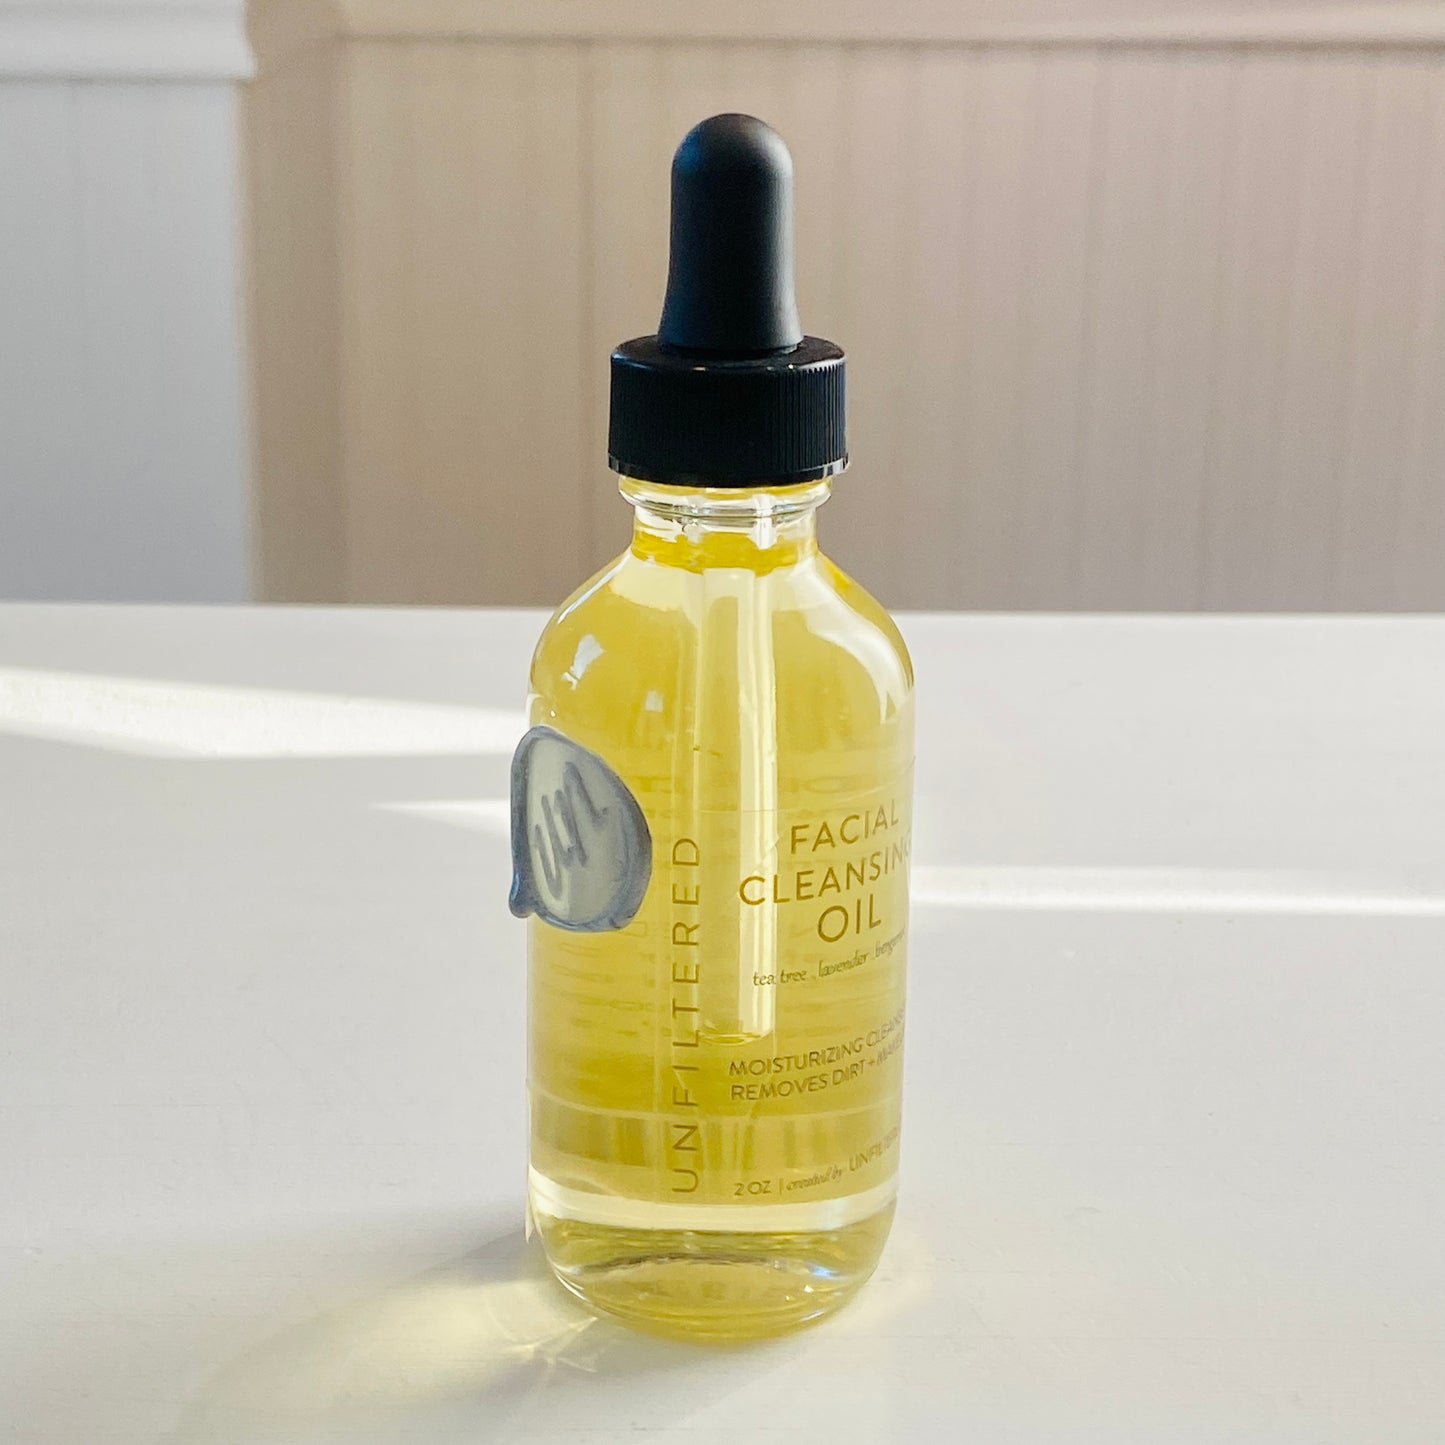 Unfiltered Skin Care - Facial Cleansing Oil 2oz